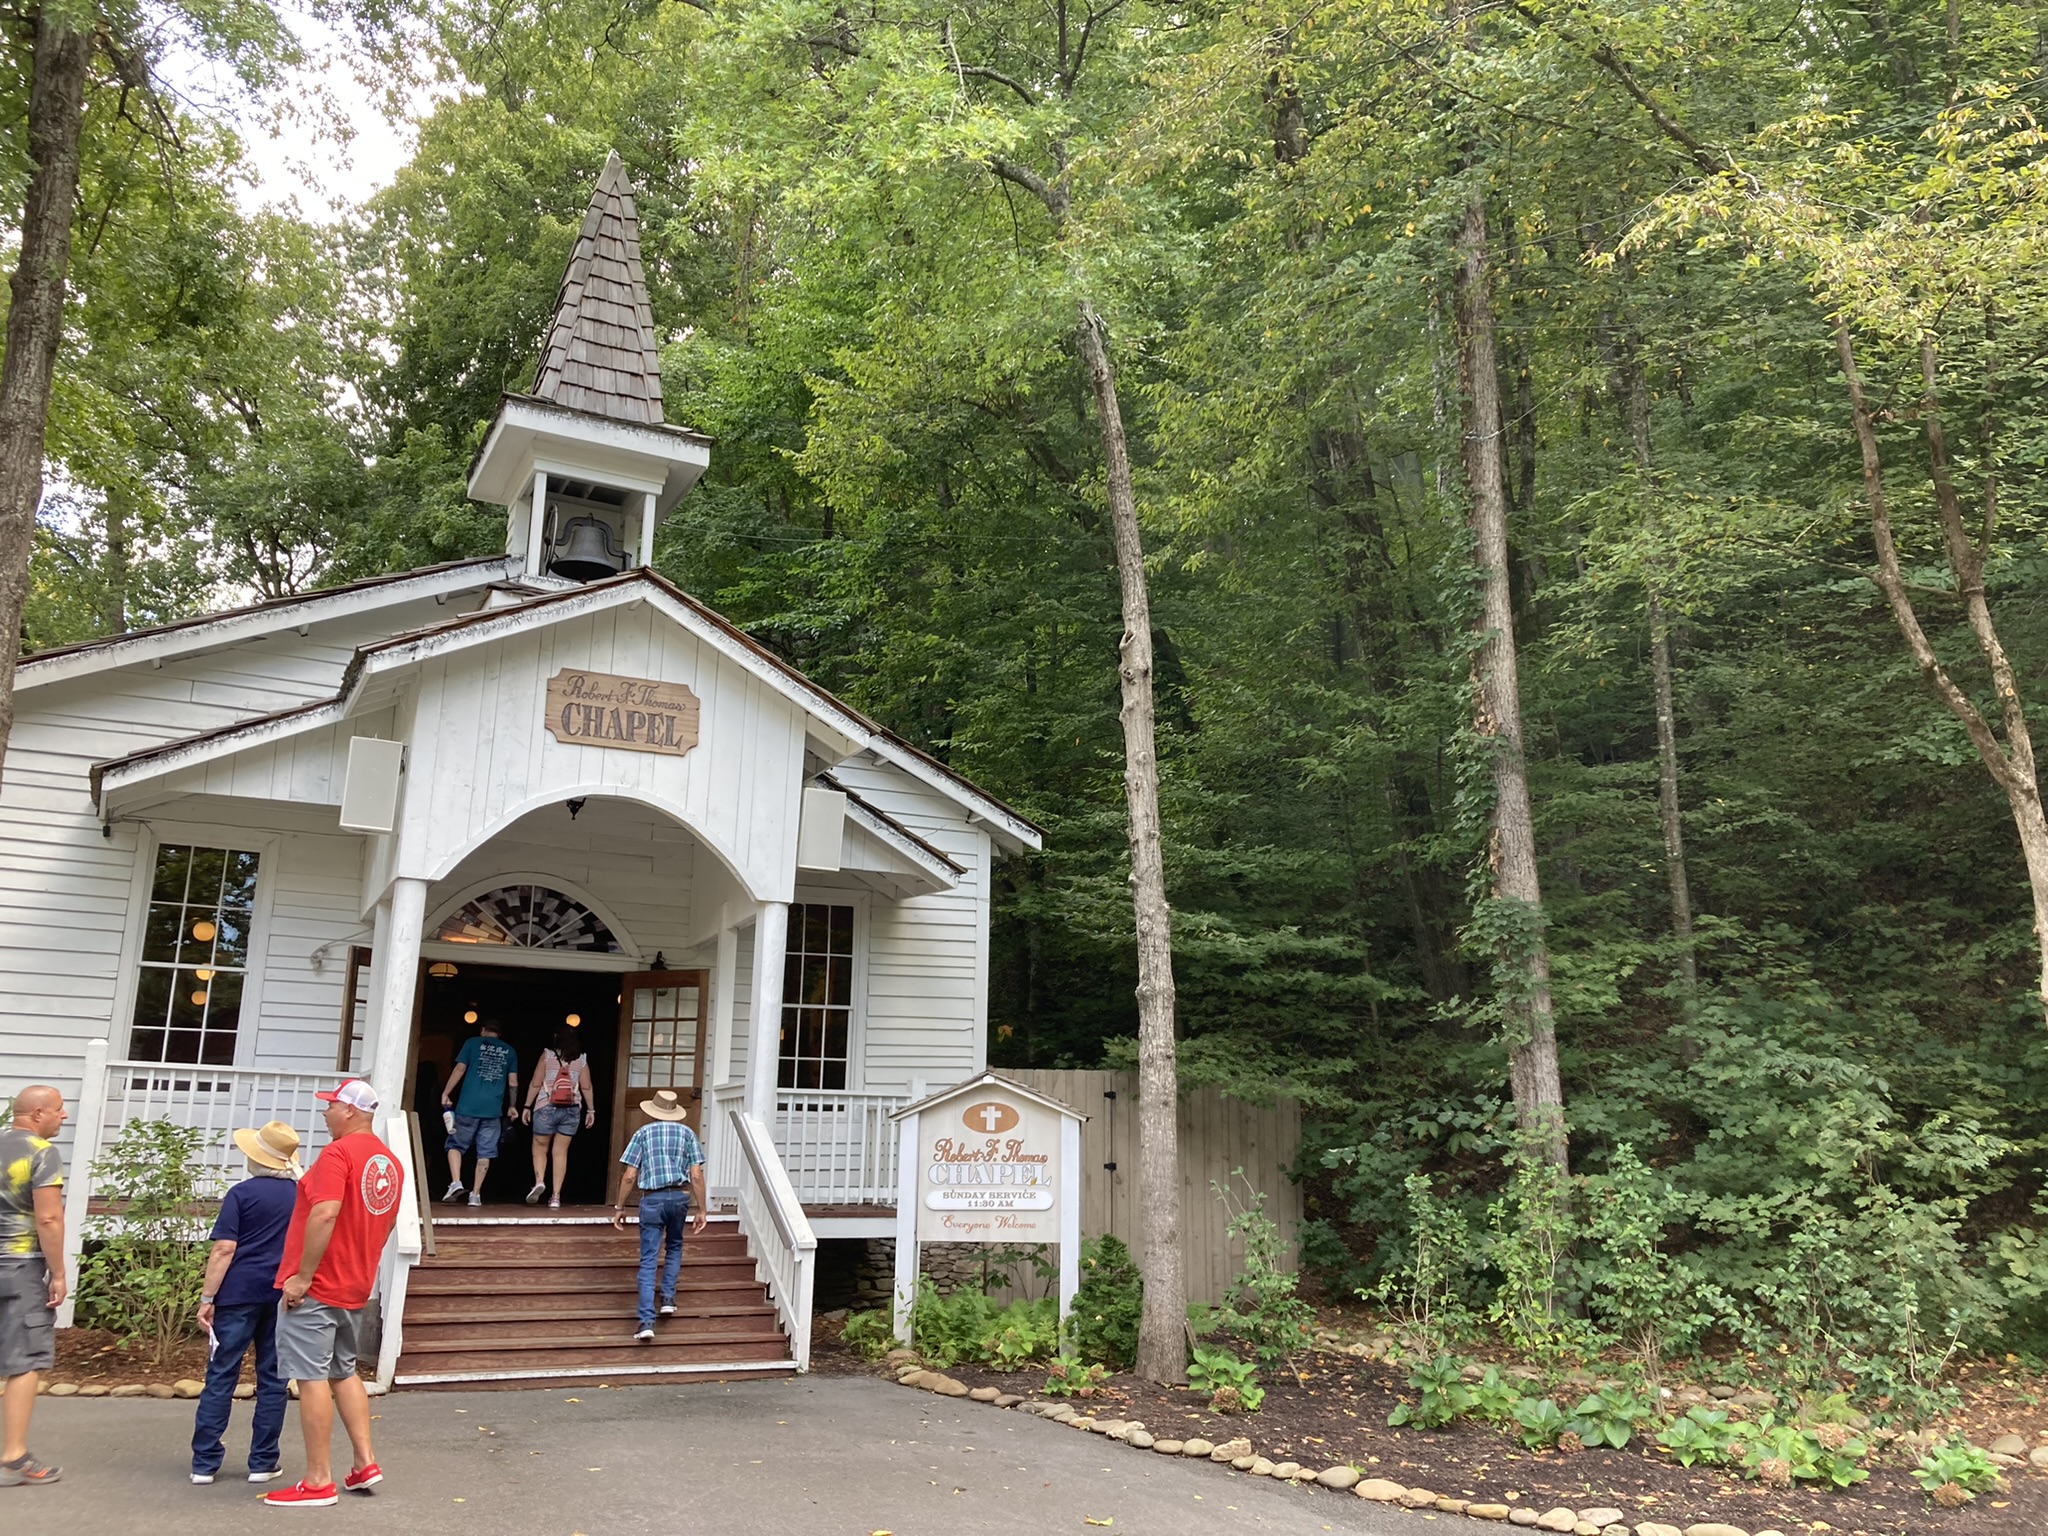 A Day At Dollywood, The Tennessee Amusement Park That Displaced Cedar Point  As The Country's Best (According To One Survey, Anyway) - Cleveland.com